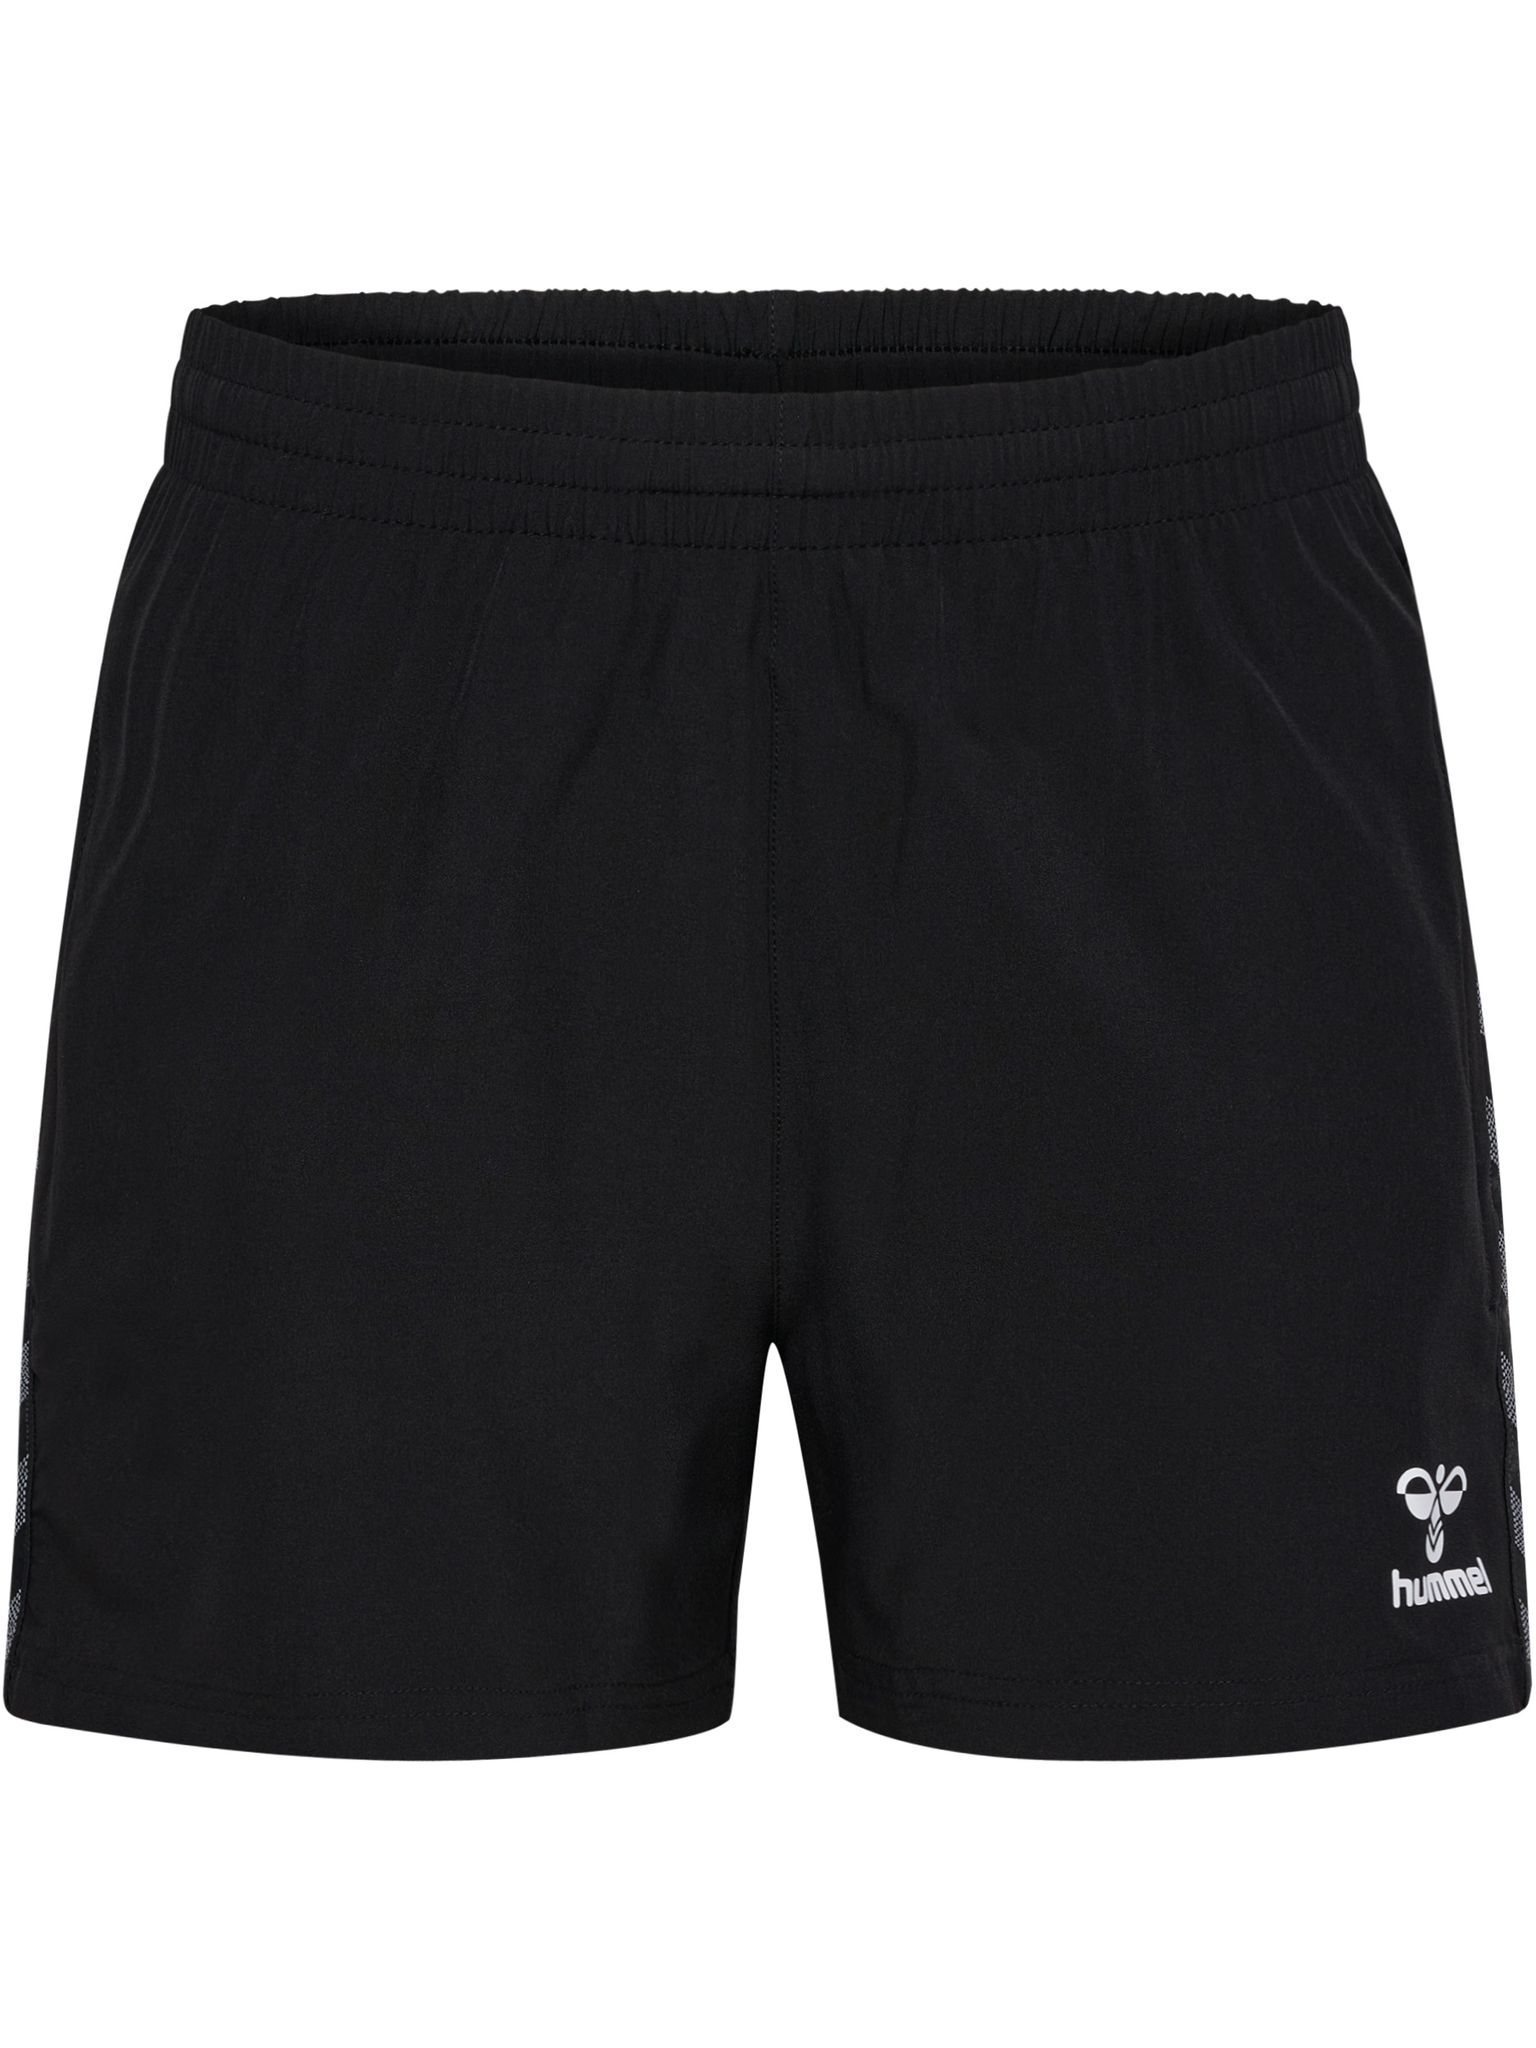 hmlAUTHENTIC WOVEN SHORTS WOMAN